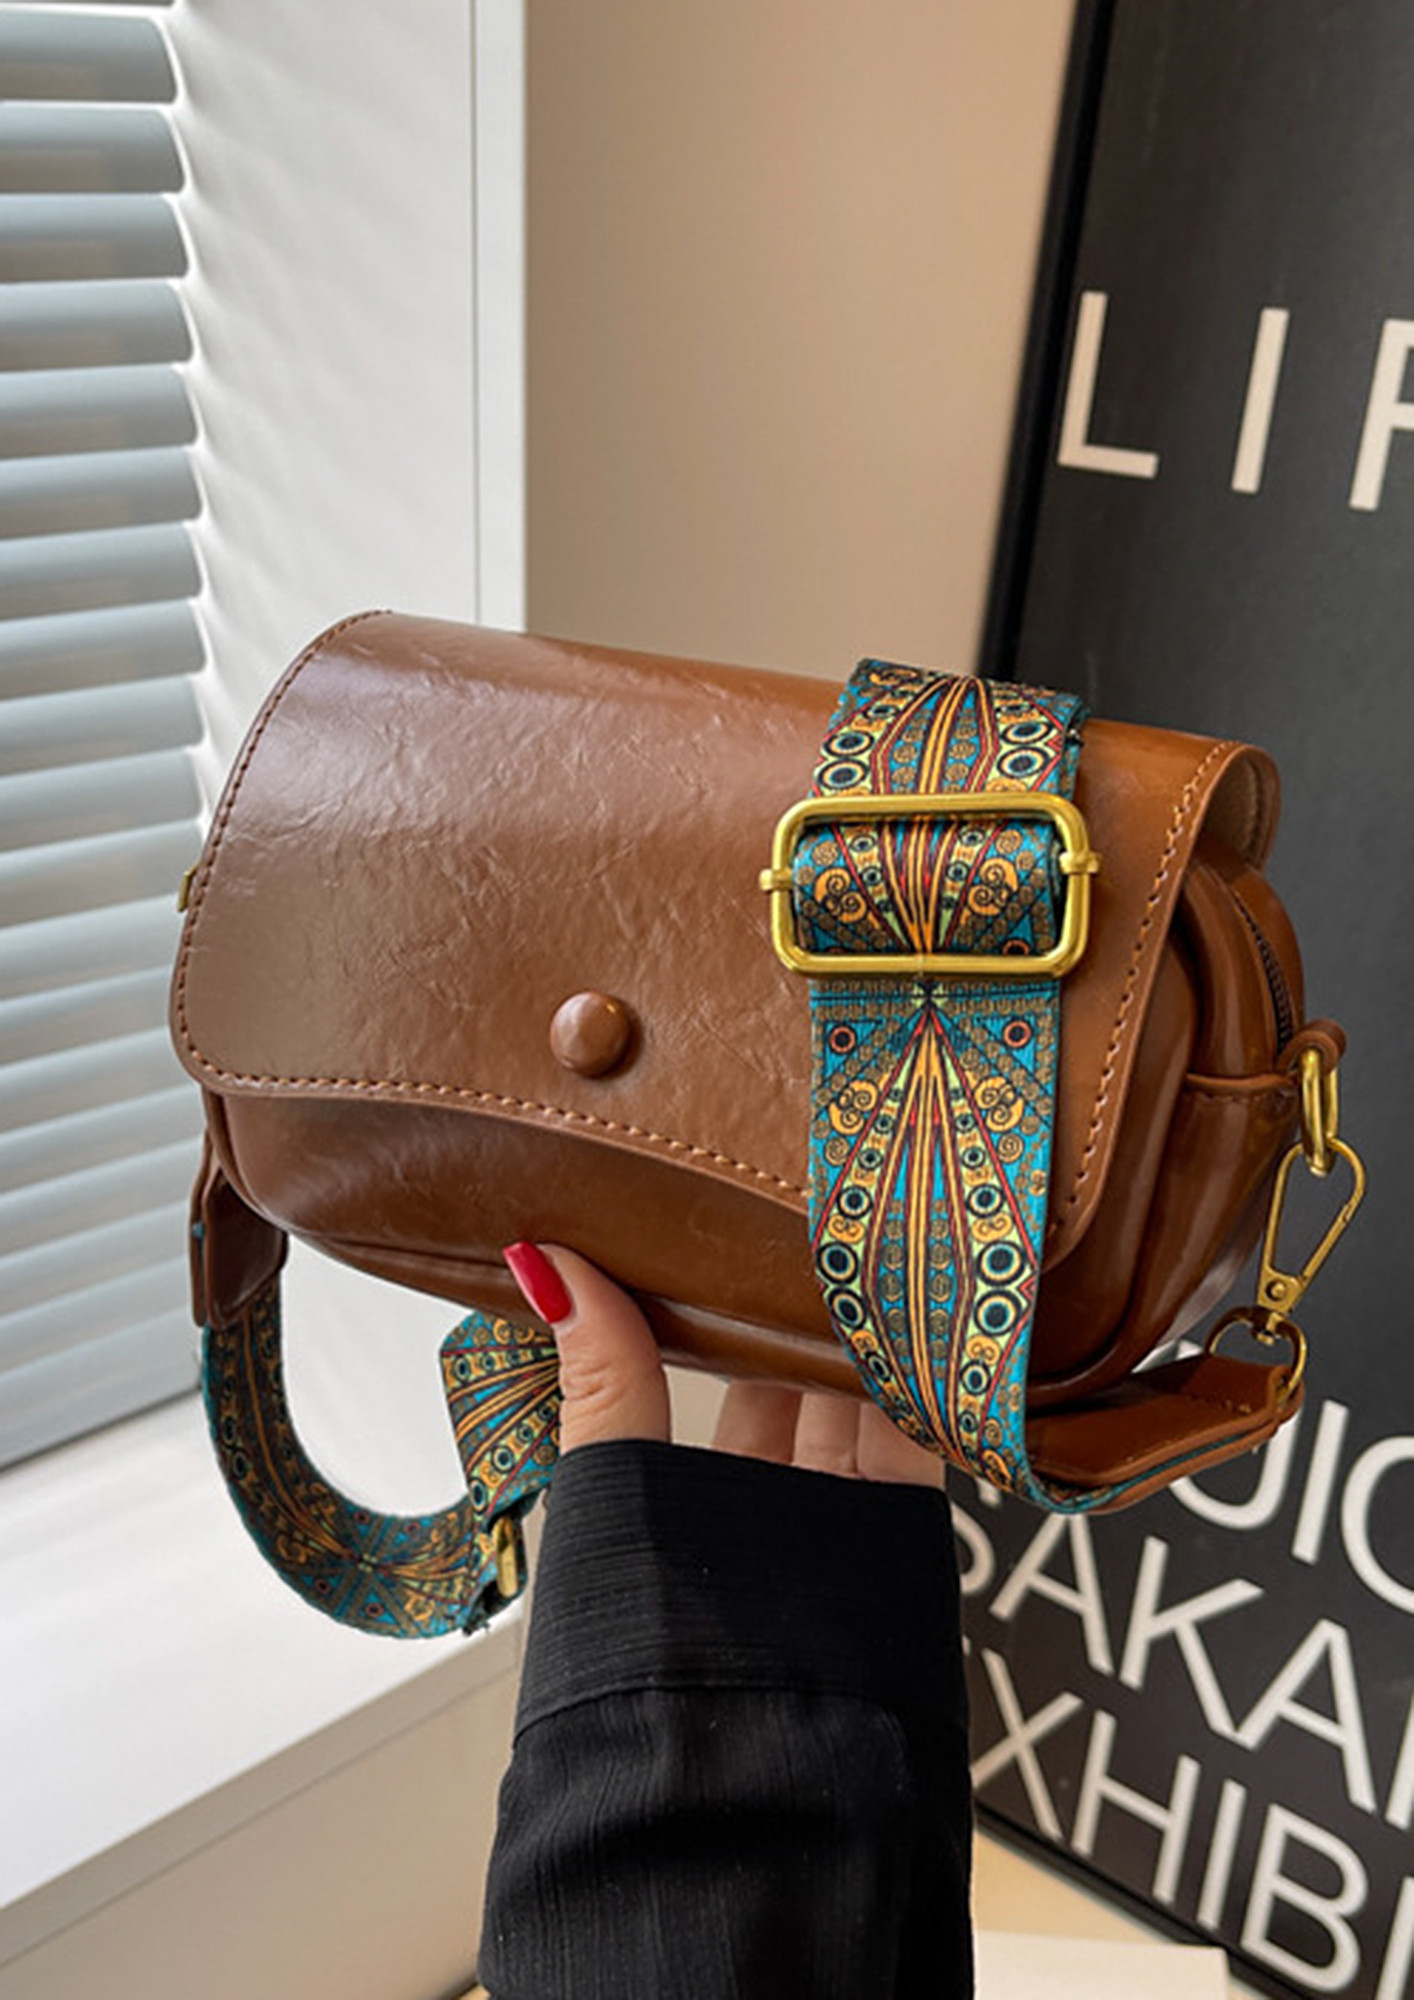 Top 5 Camel Saddle Bags | Thrifts and Threads